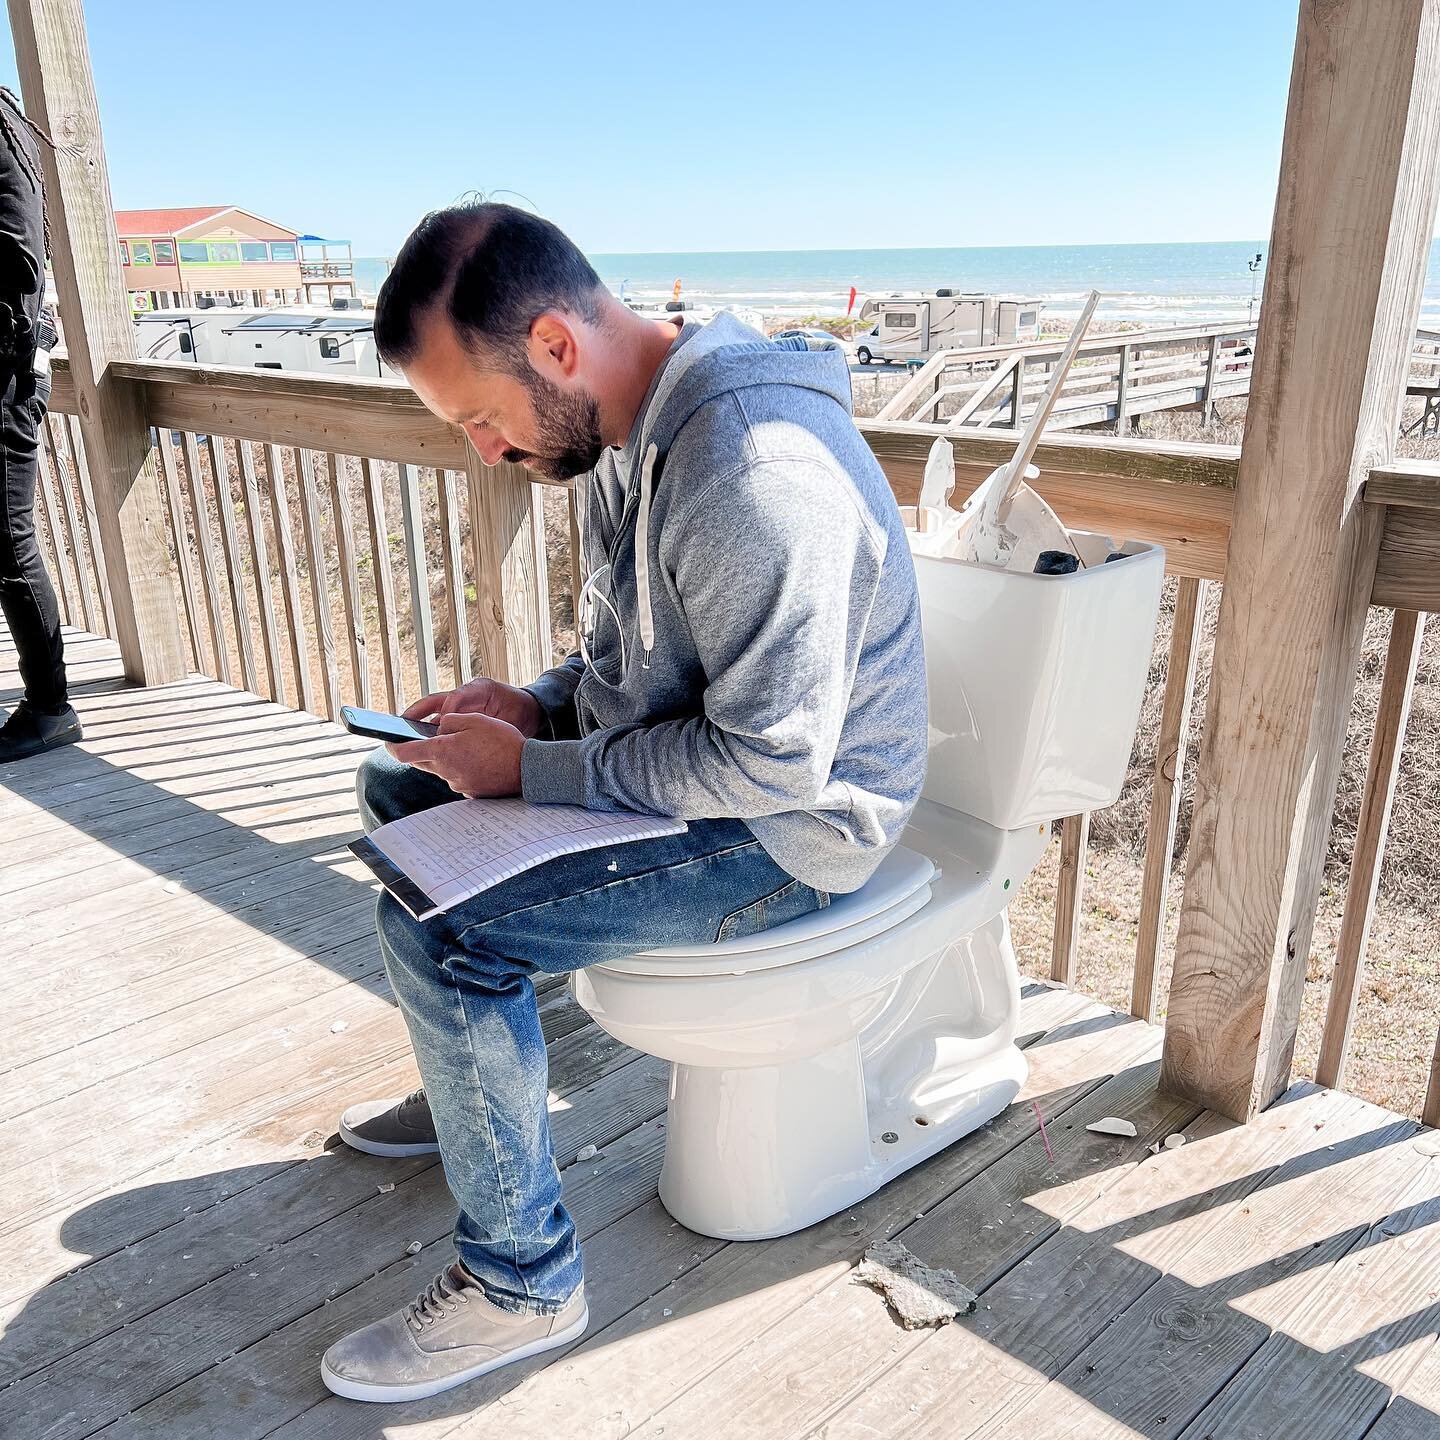 Actual footage of Corey trying to figure out which way the shiplap goes. #iykyk
.
..
.
#battleonthebeach #hgtv #hgtvcanada #beachhouse #beachhousestyle #beachhousedesign #homeflipping #homeflipper #shiplap #bathroomdesign #bathroomremodel #bathroomin